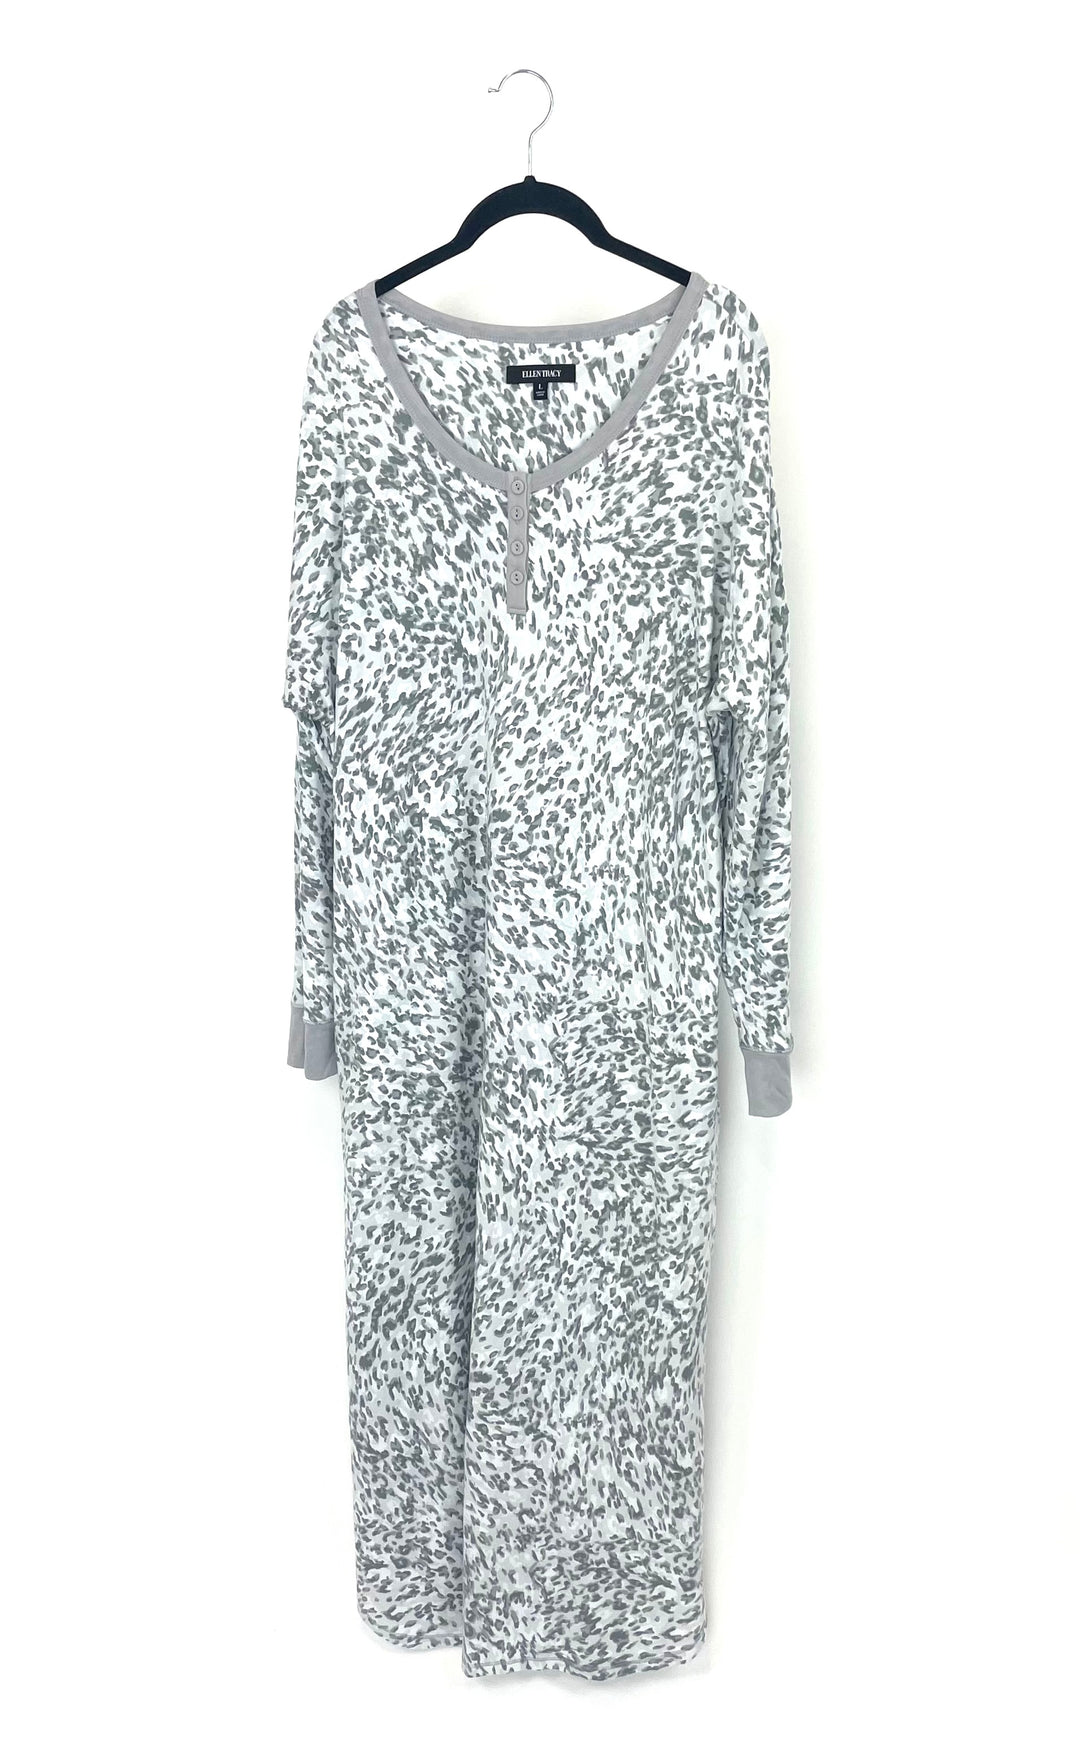 Grey Animal Print Nightgown - Size 4/6, 12/14 and 18/20